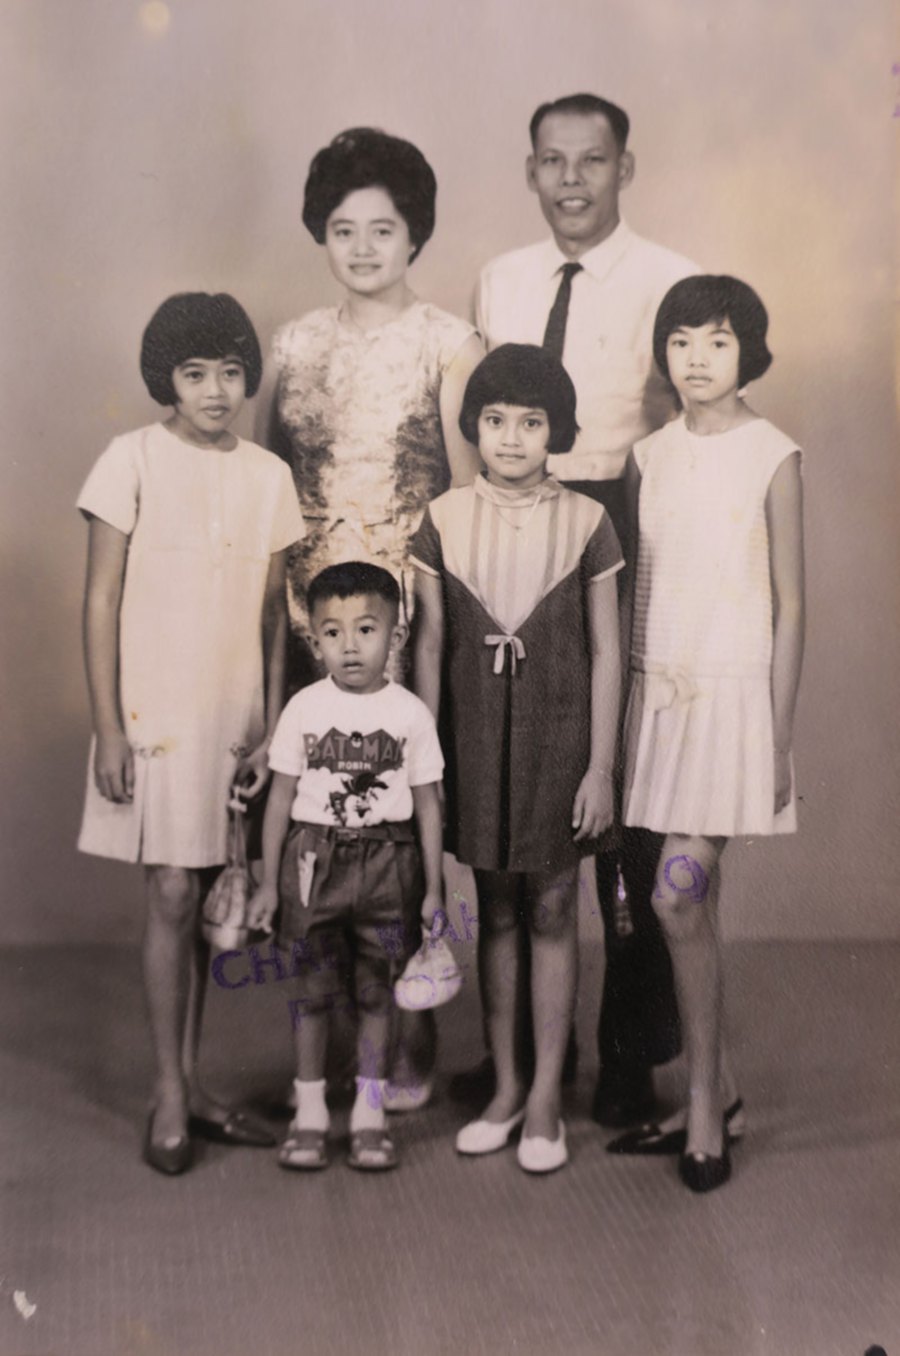 Formal photo of the Loh family taken in Chau Wah Photo Studio; This is the proof copy – notice the stamp across the photo – provided for review. 